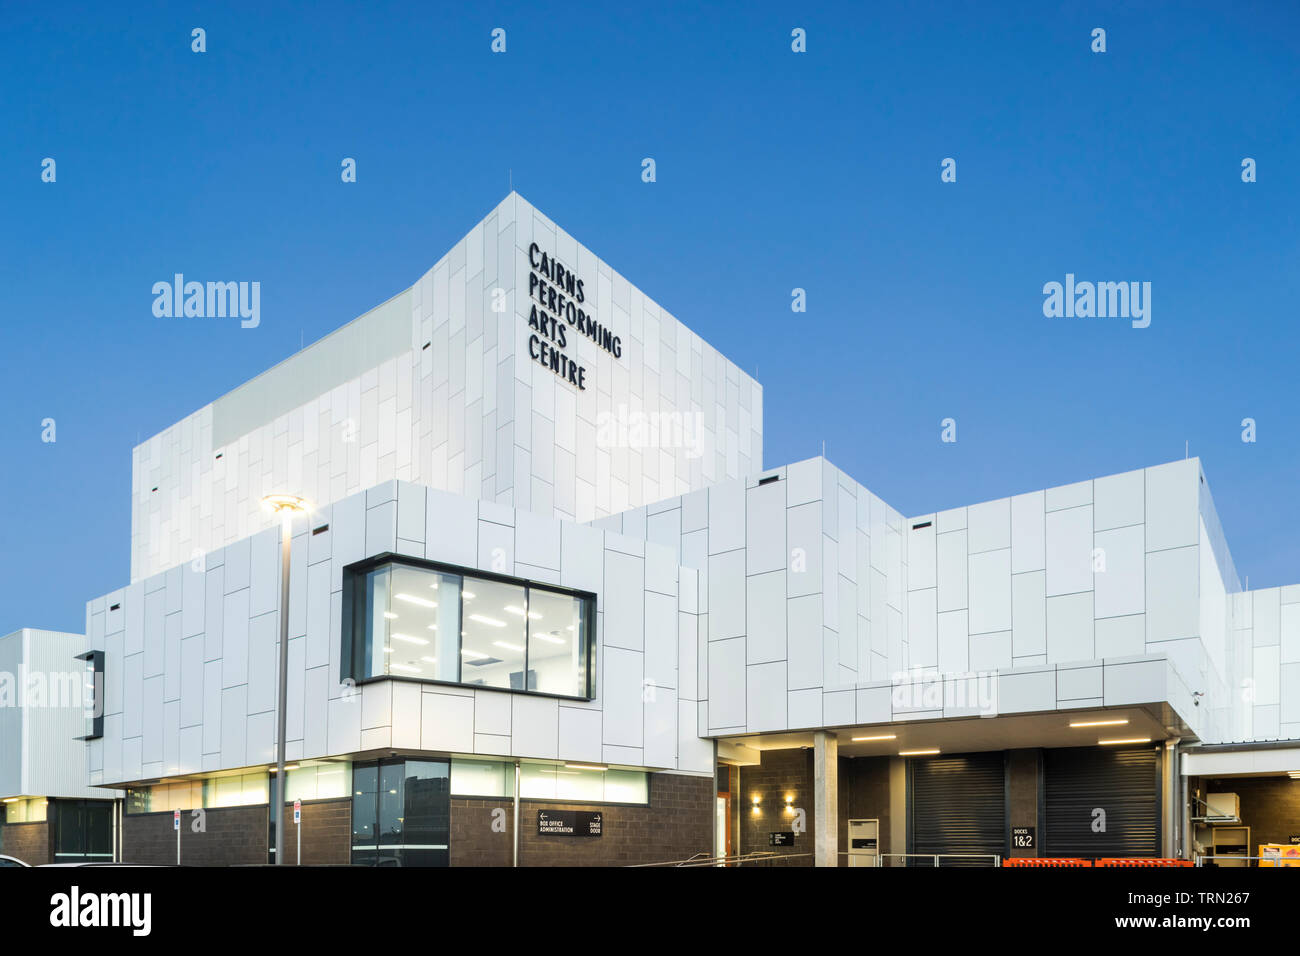 The rear facade of the Cairns Performing Arts Centre, Cairns, Queensland, Australia Stock Photo